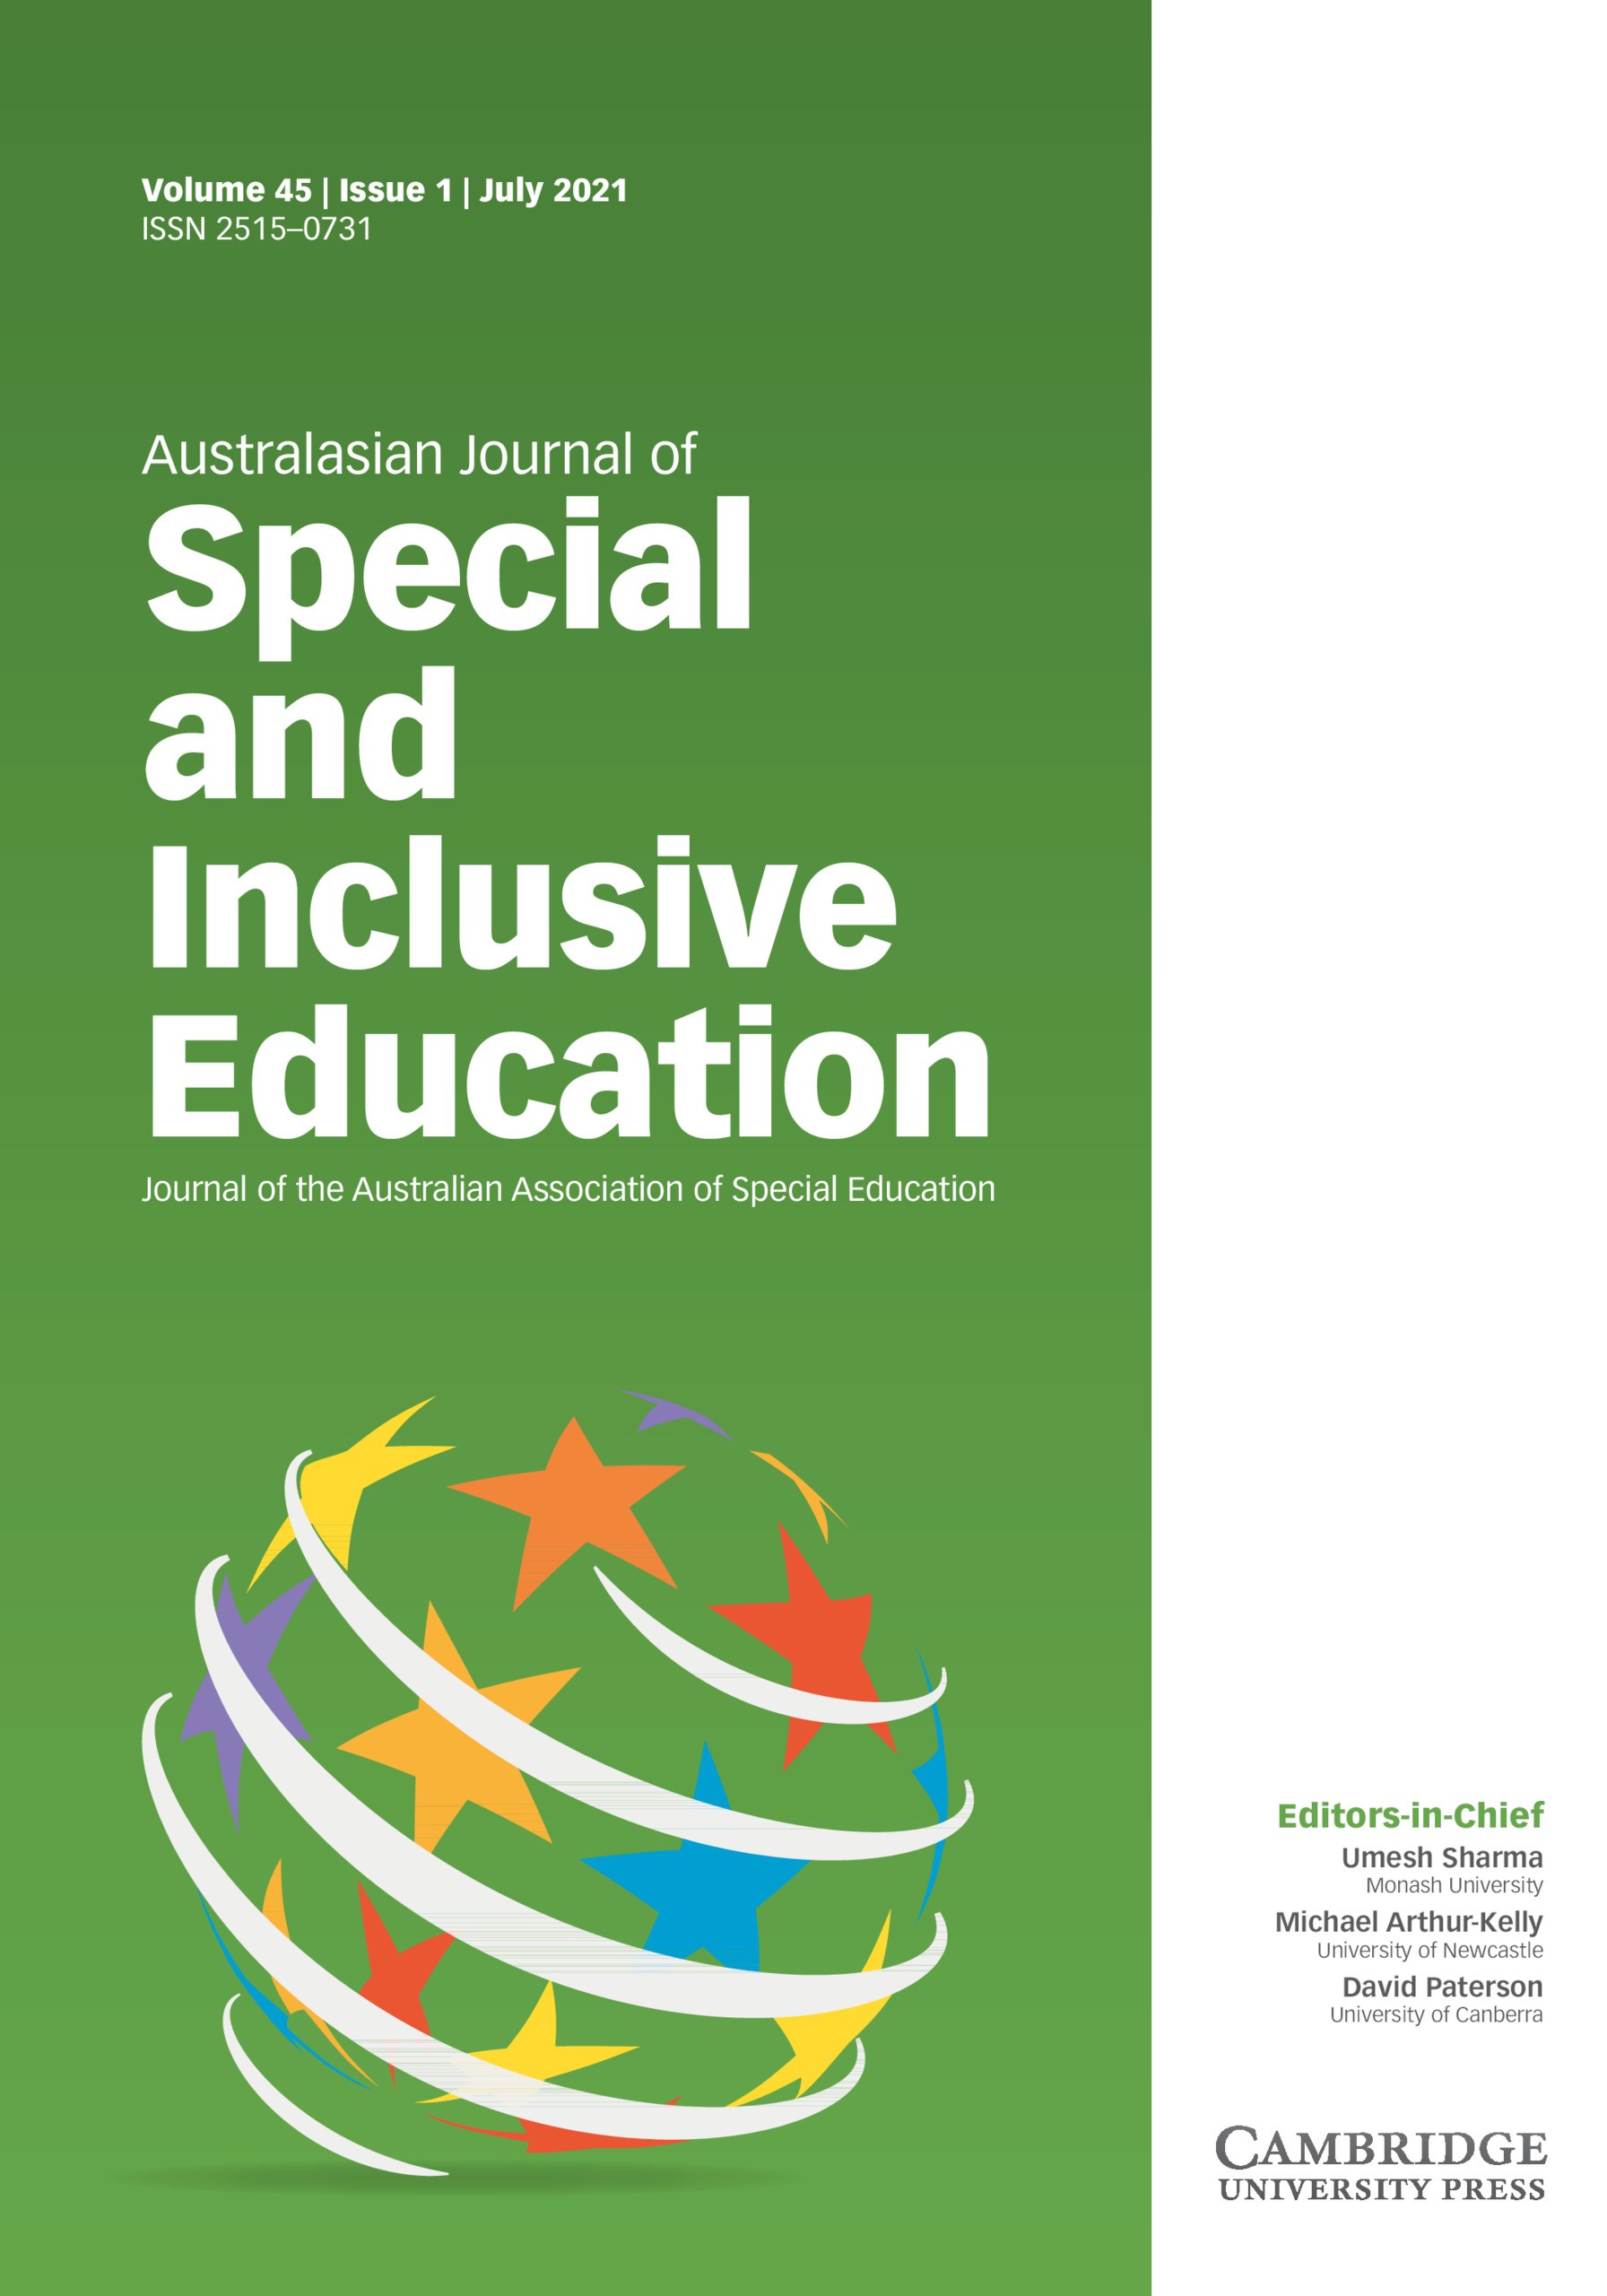 journal articles on special education